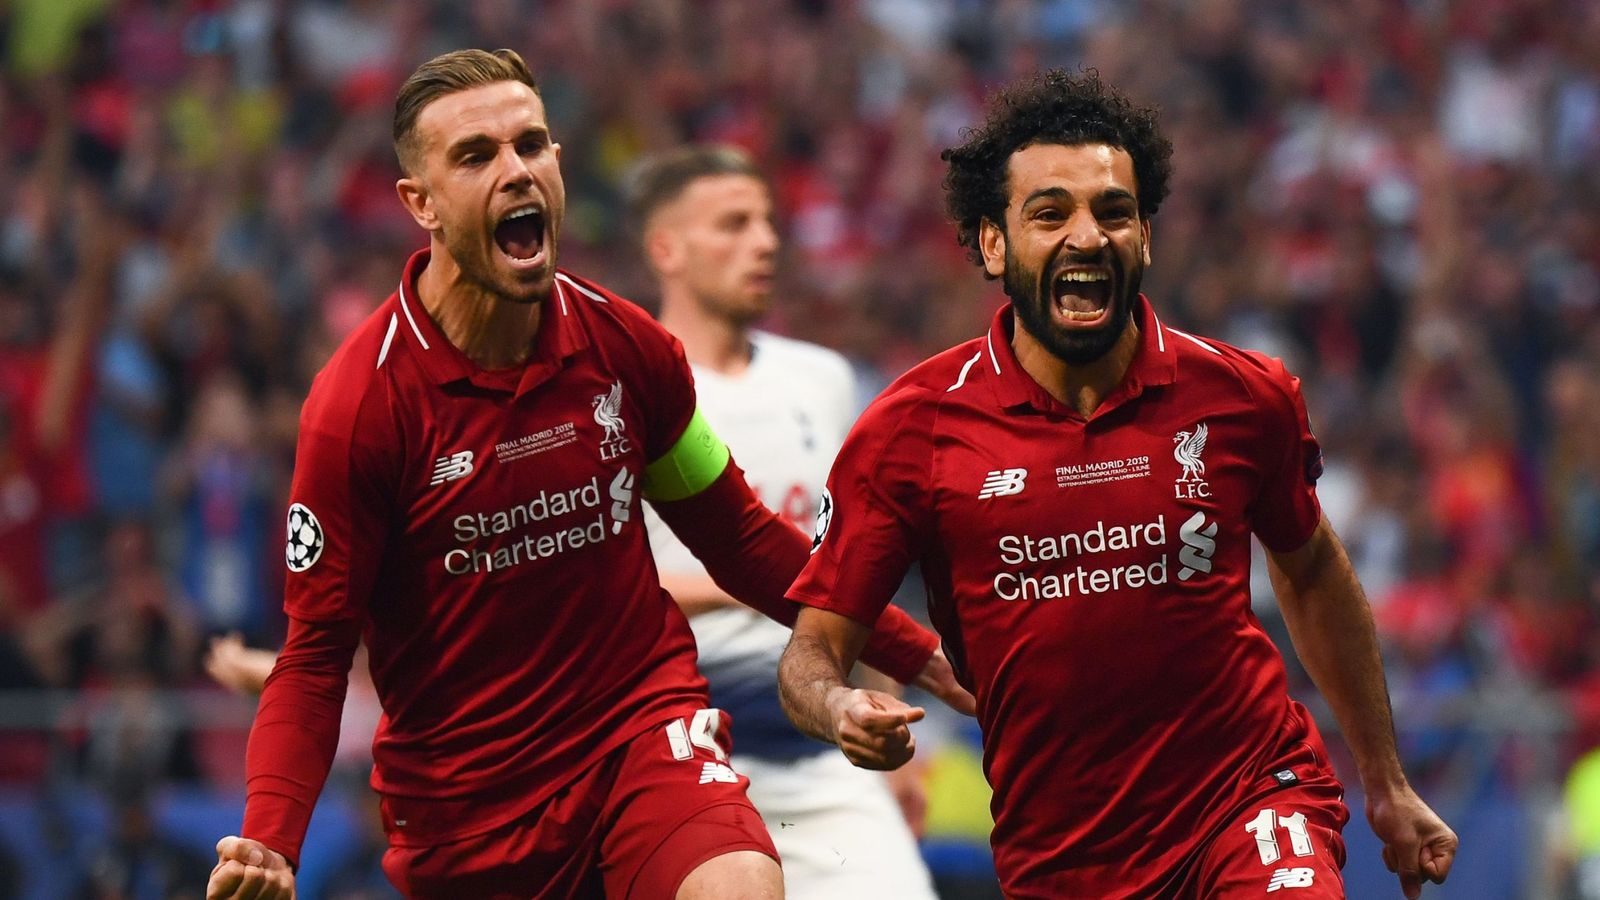 Champions League final player ratings: Alisson impresses as